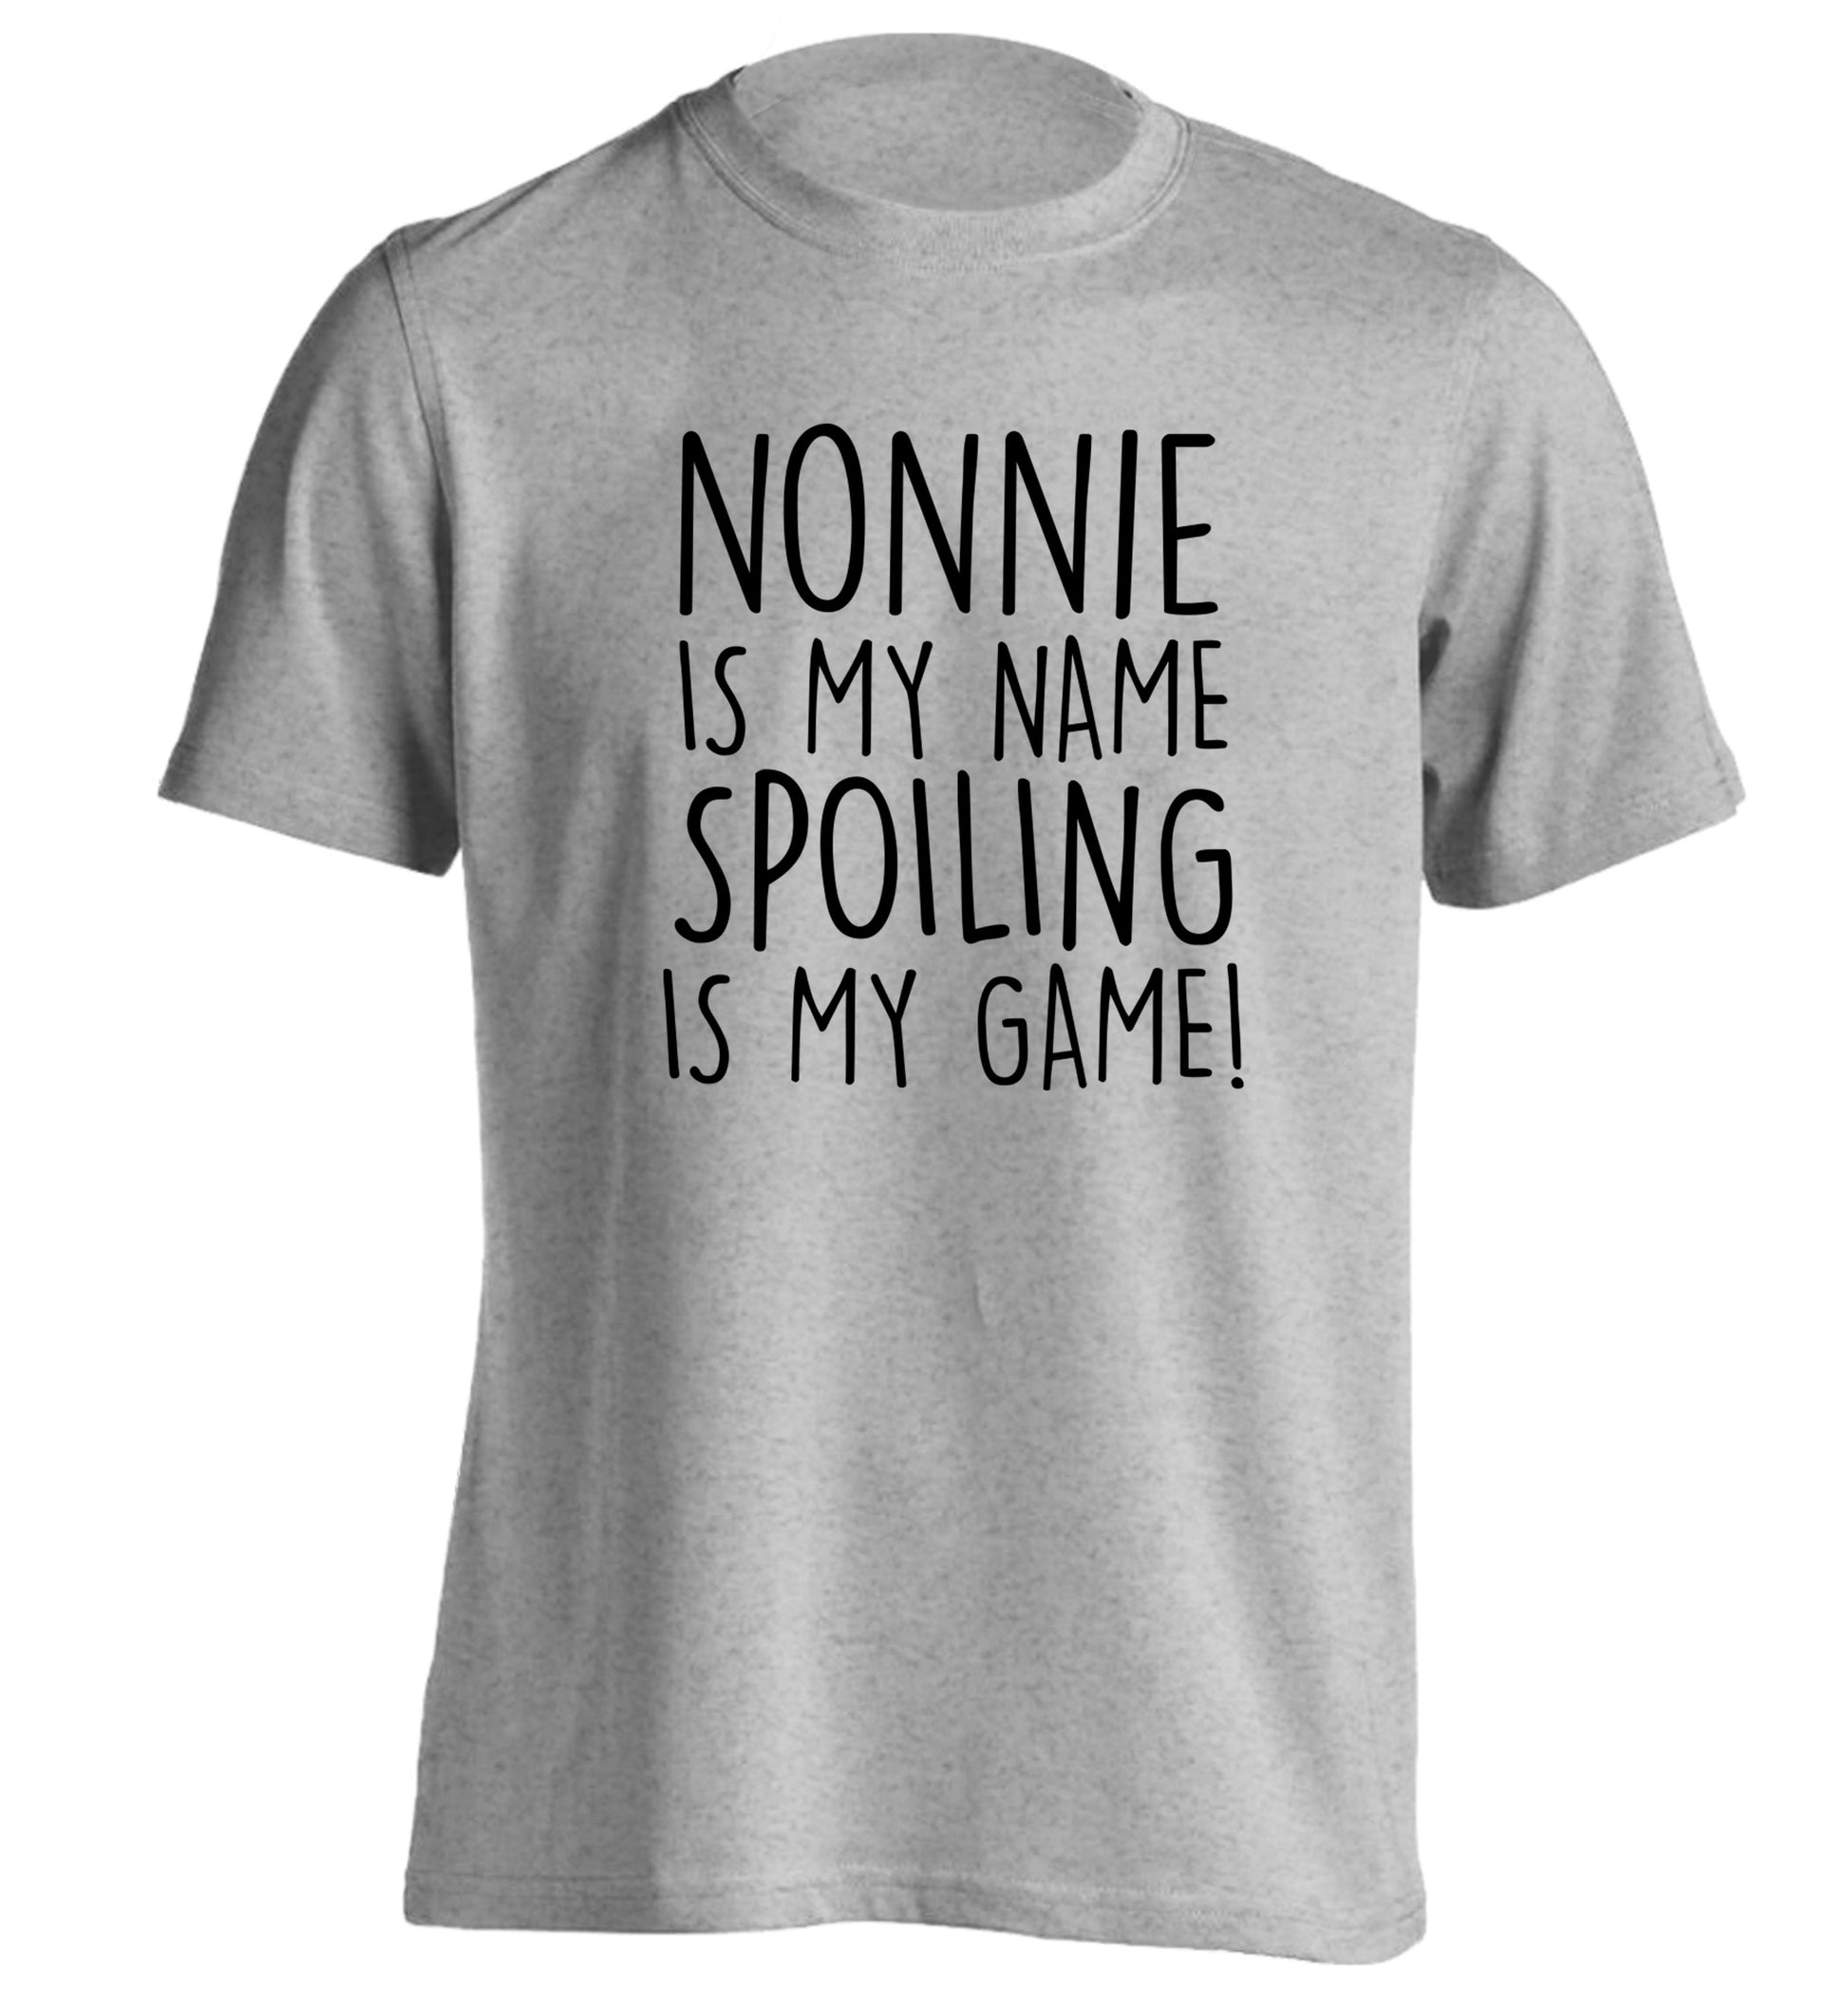 Nonnie is my name, spoiling is my game adults unisex grey Tshirt 2XL